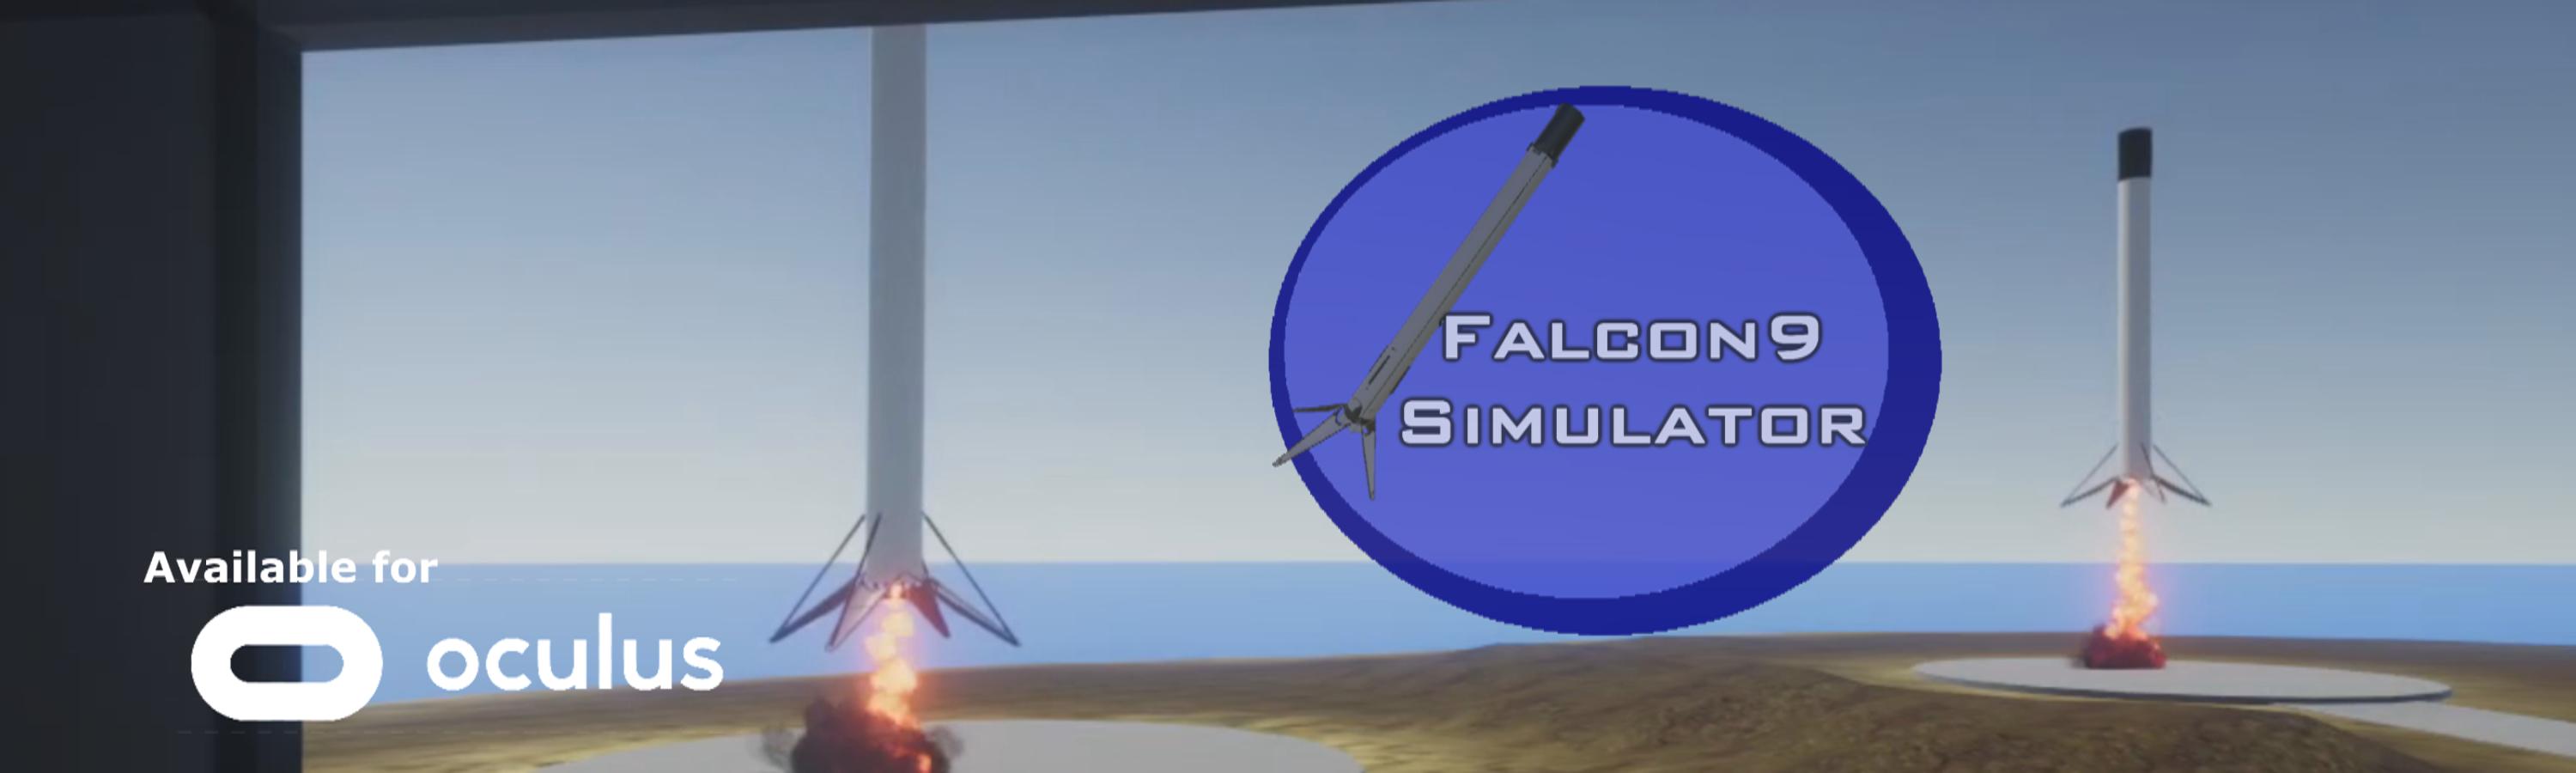 SpaceX Falcon9 Landing Simulation for Oculus Quest